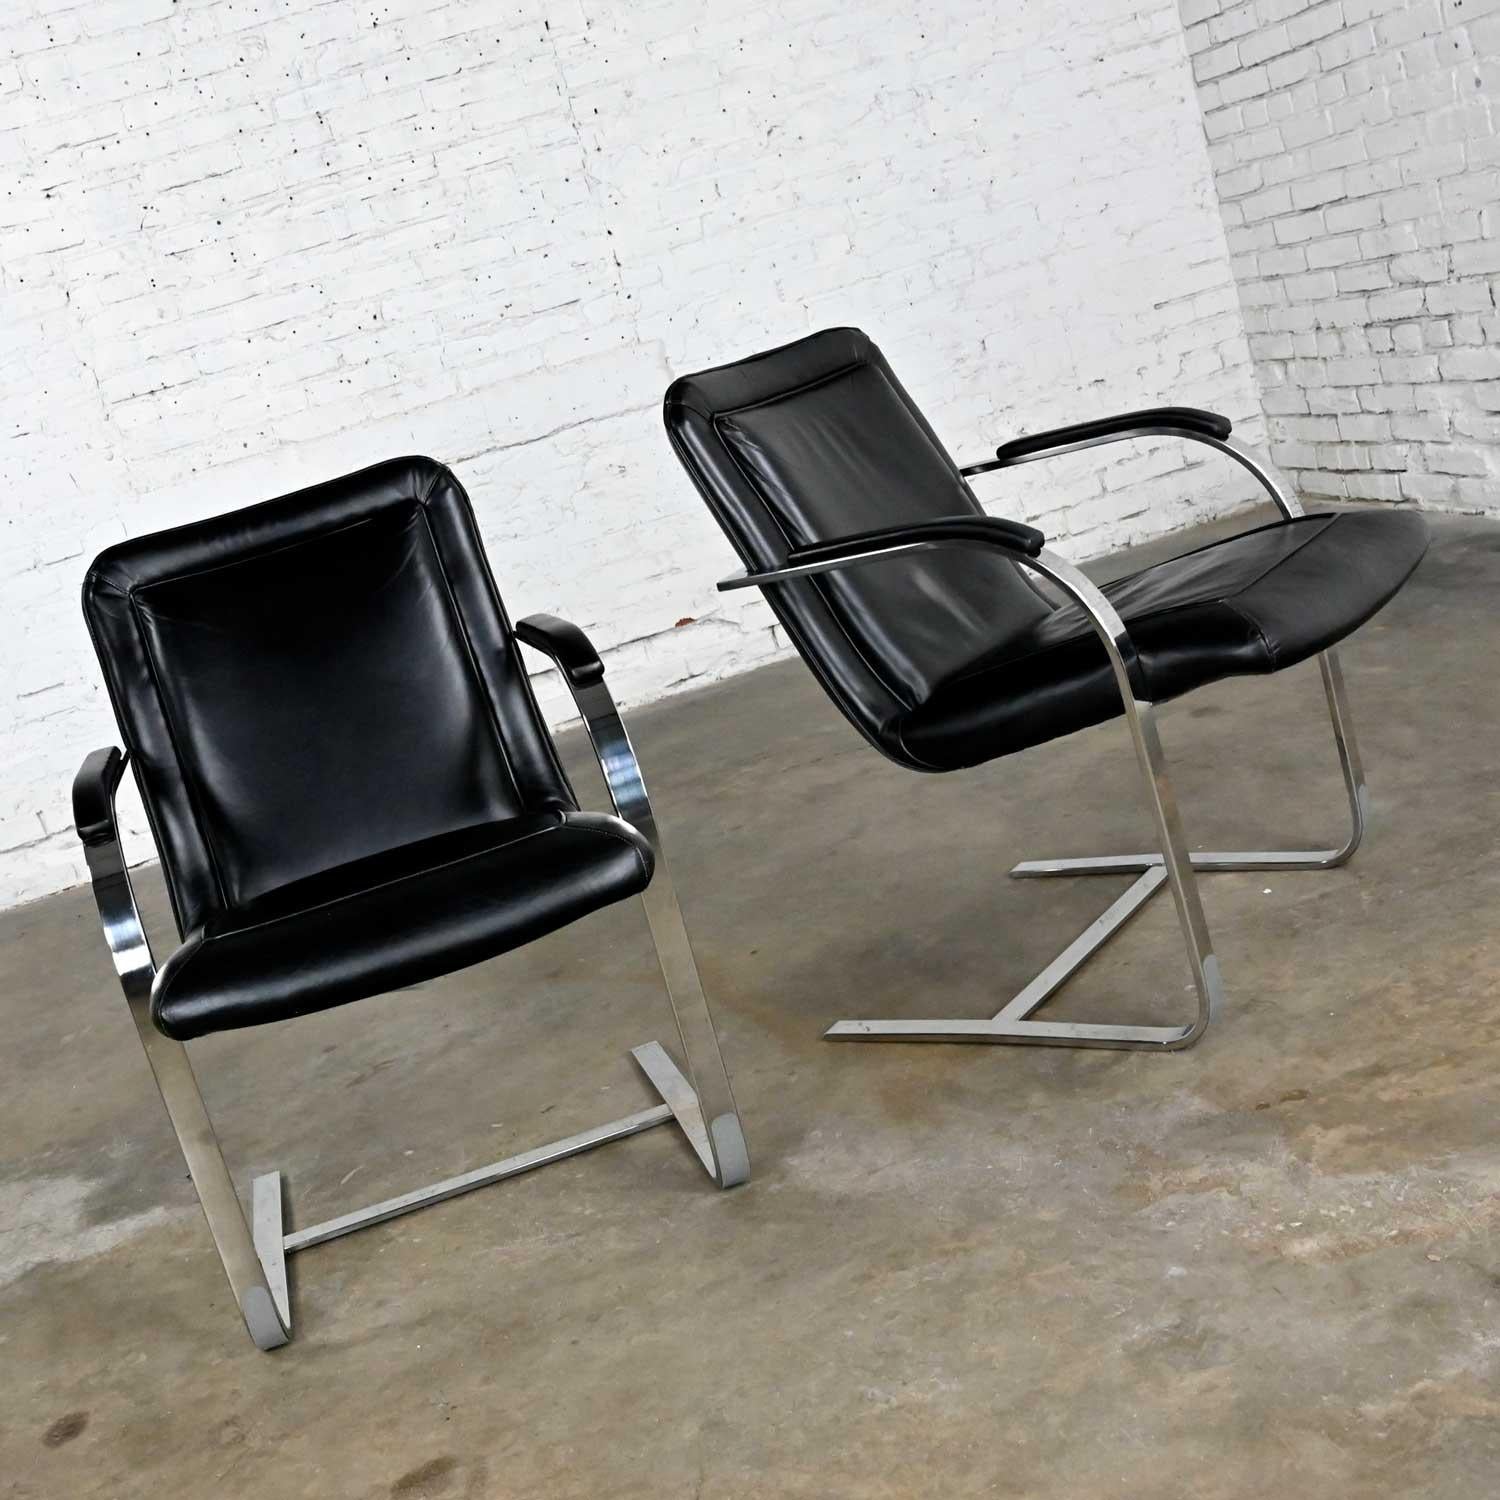 Wonderful pair of modern St. Timothy Chair Company chrome rectangular tube and black leather cantilever chairs. Beautiful condition, keeping in mind that these are vintage and not new so will have signs of use and wear. We have touched up the